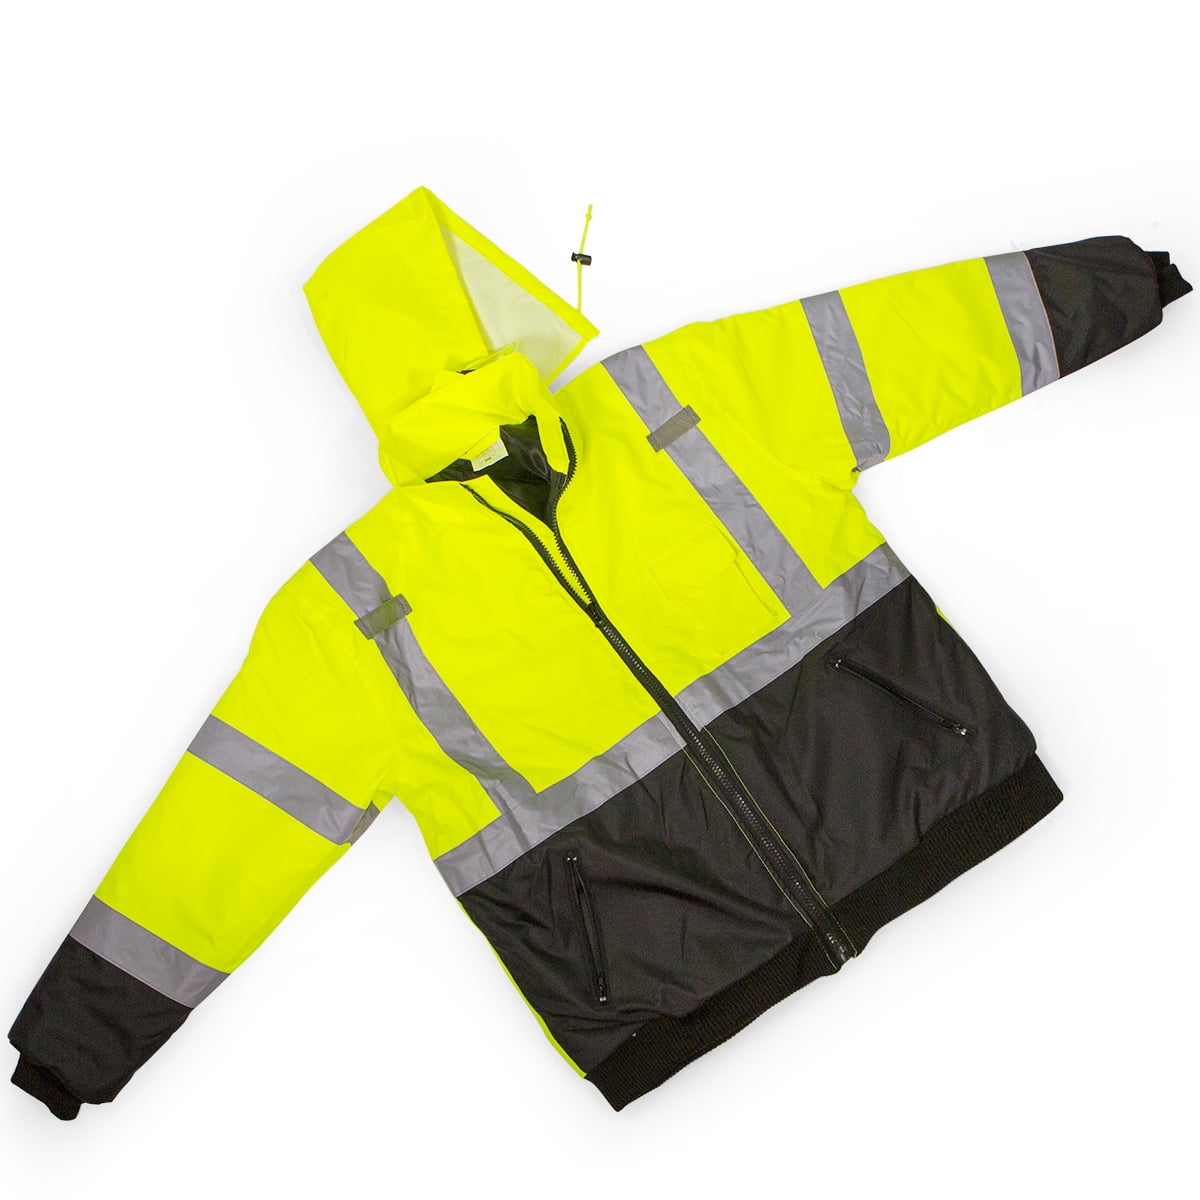 Hi-Vis Safety Hoodie with Black Bottom Forester High Visibility Reflective Class 3 Zippered Hooded Sweatshirt